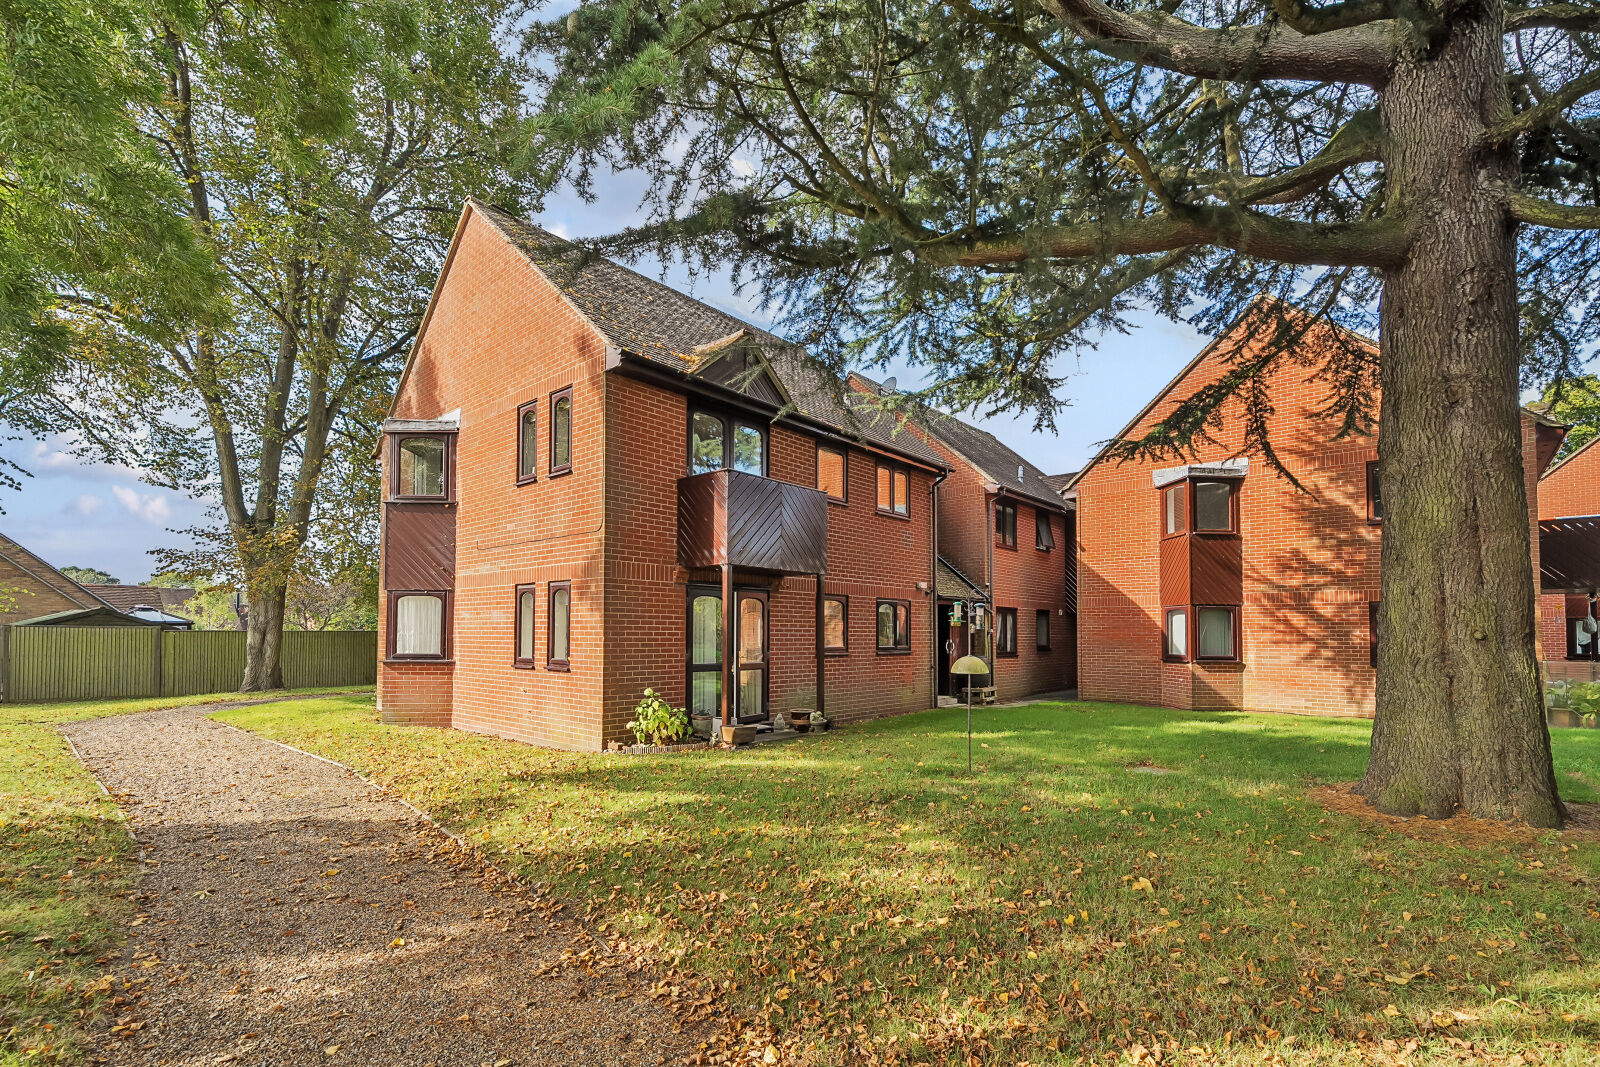 2 bedroom  flat for sale Essex Way, Sonning Common, RG4, main image